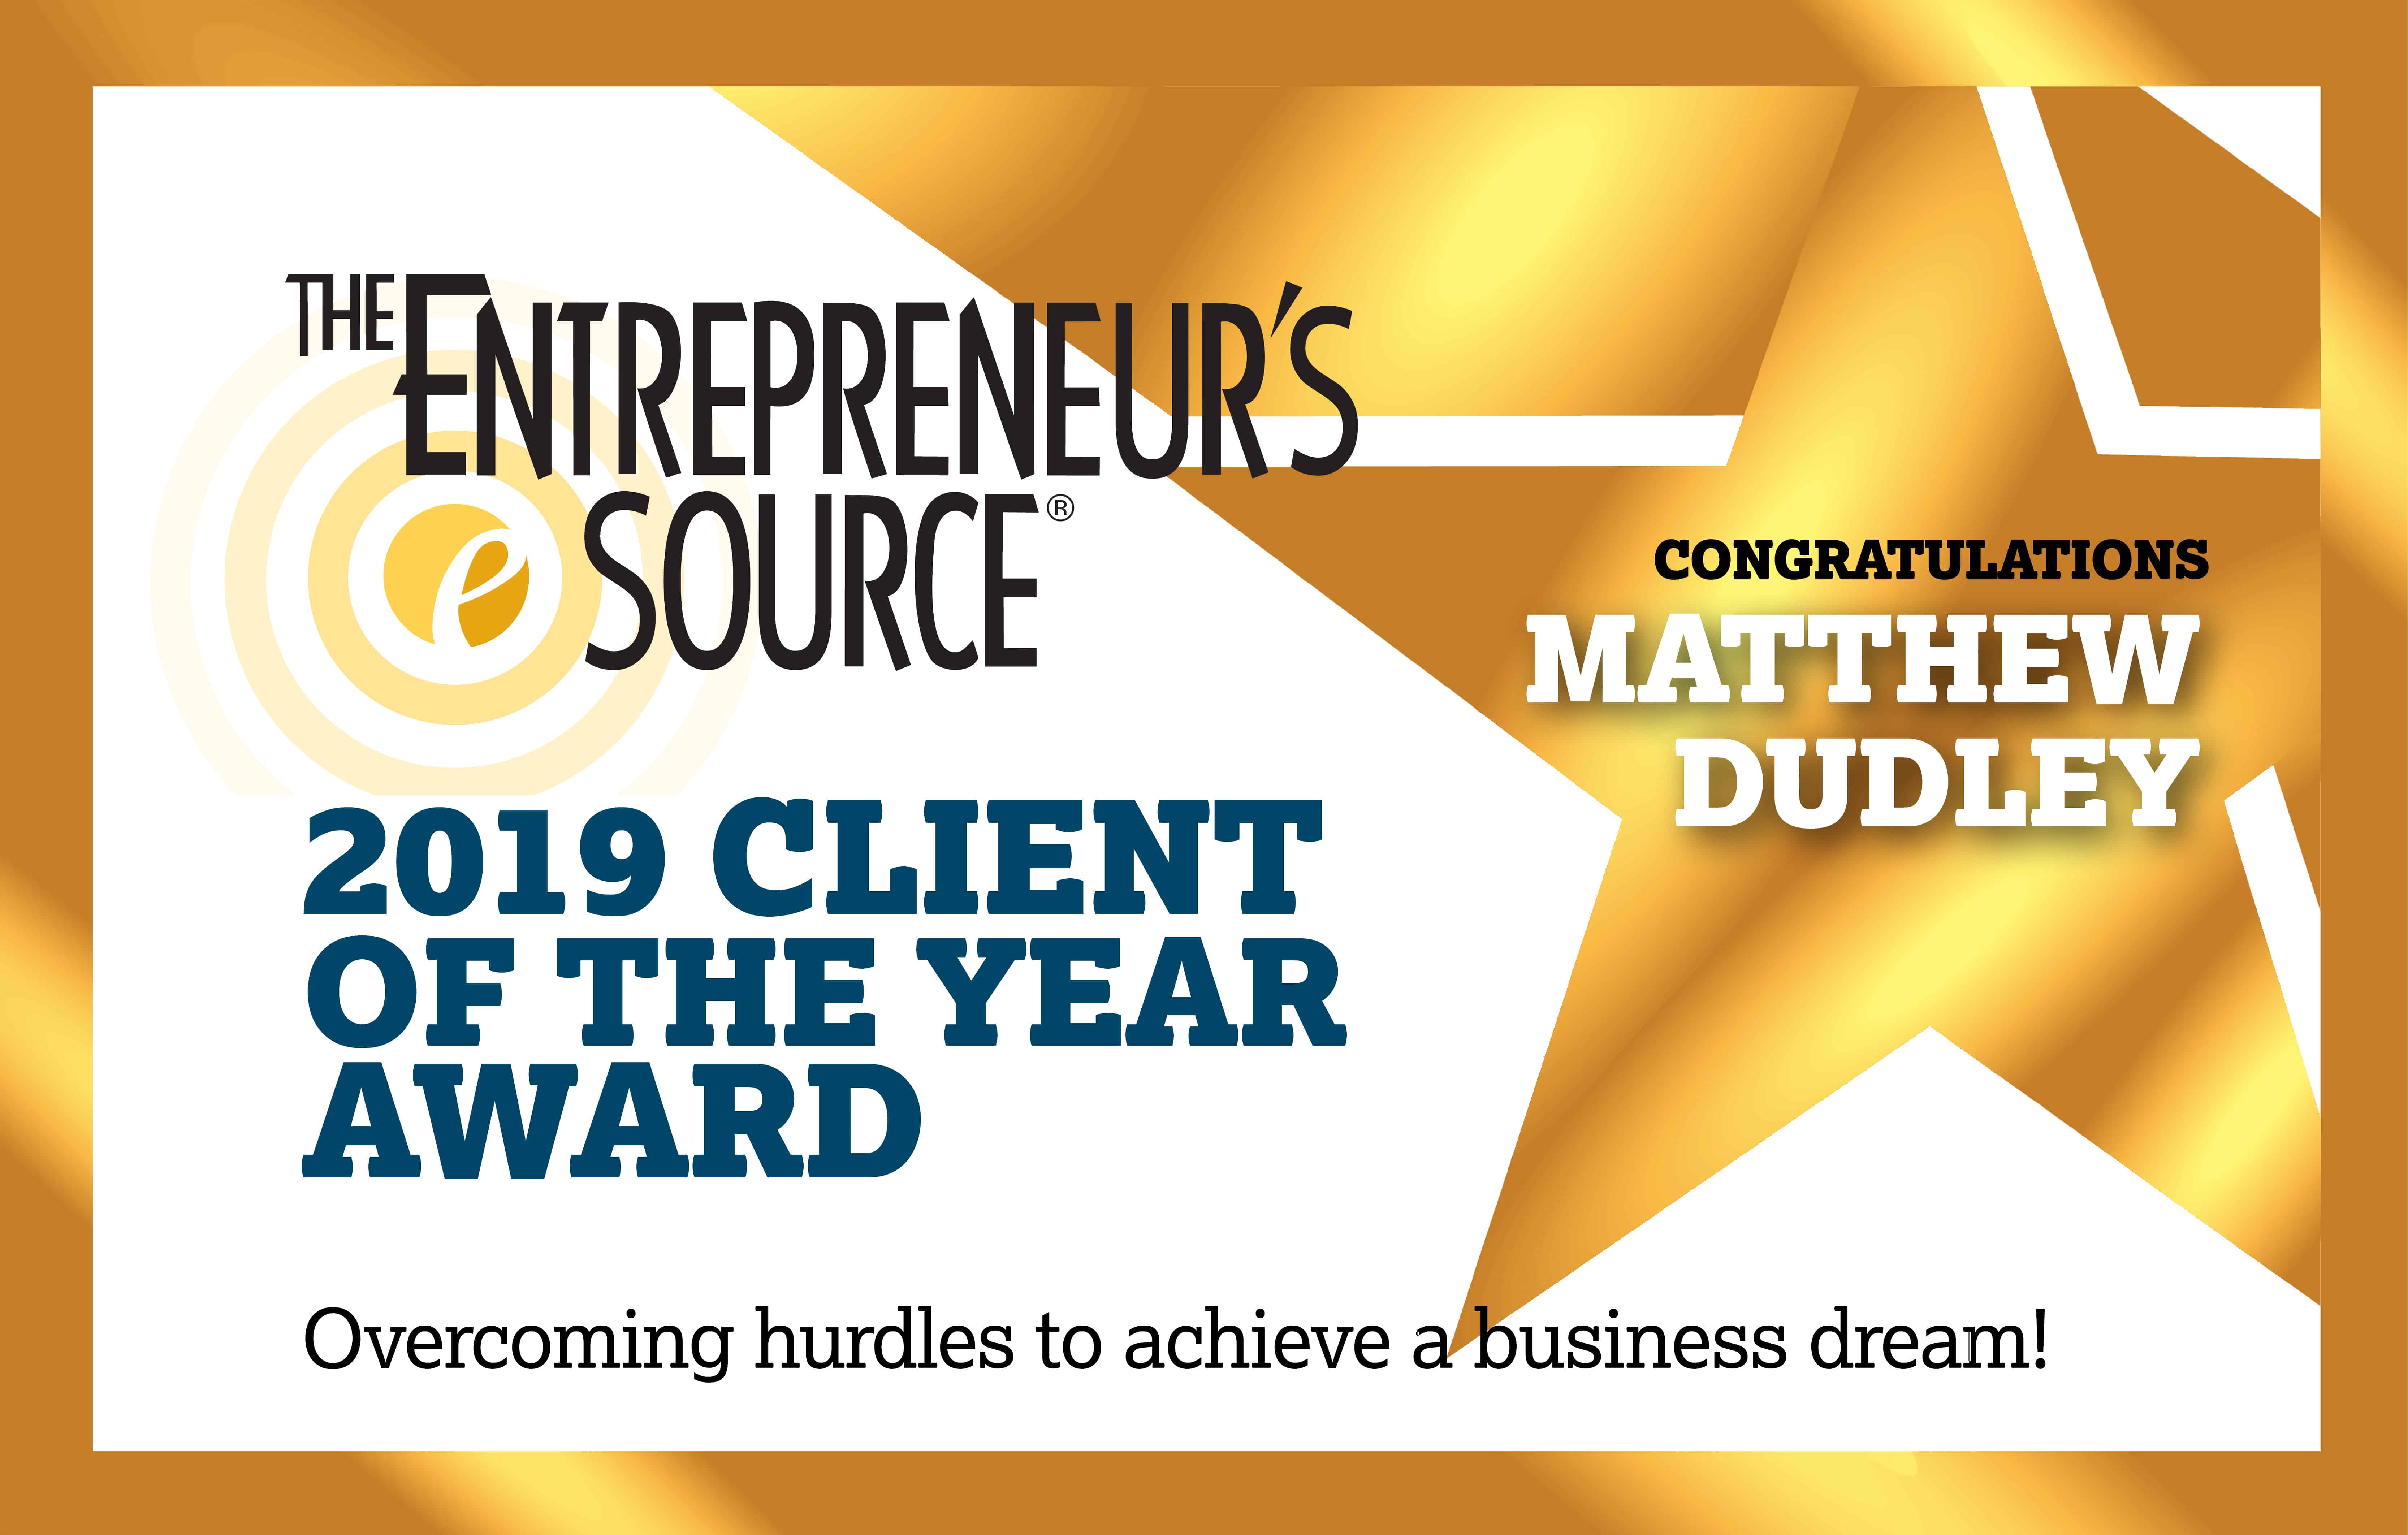 gold 2019 Client of the Year Award from The Entrepreneur's Source